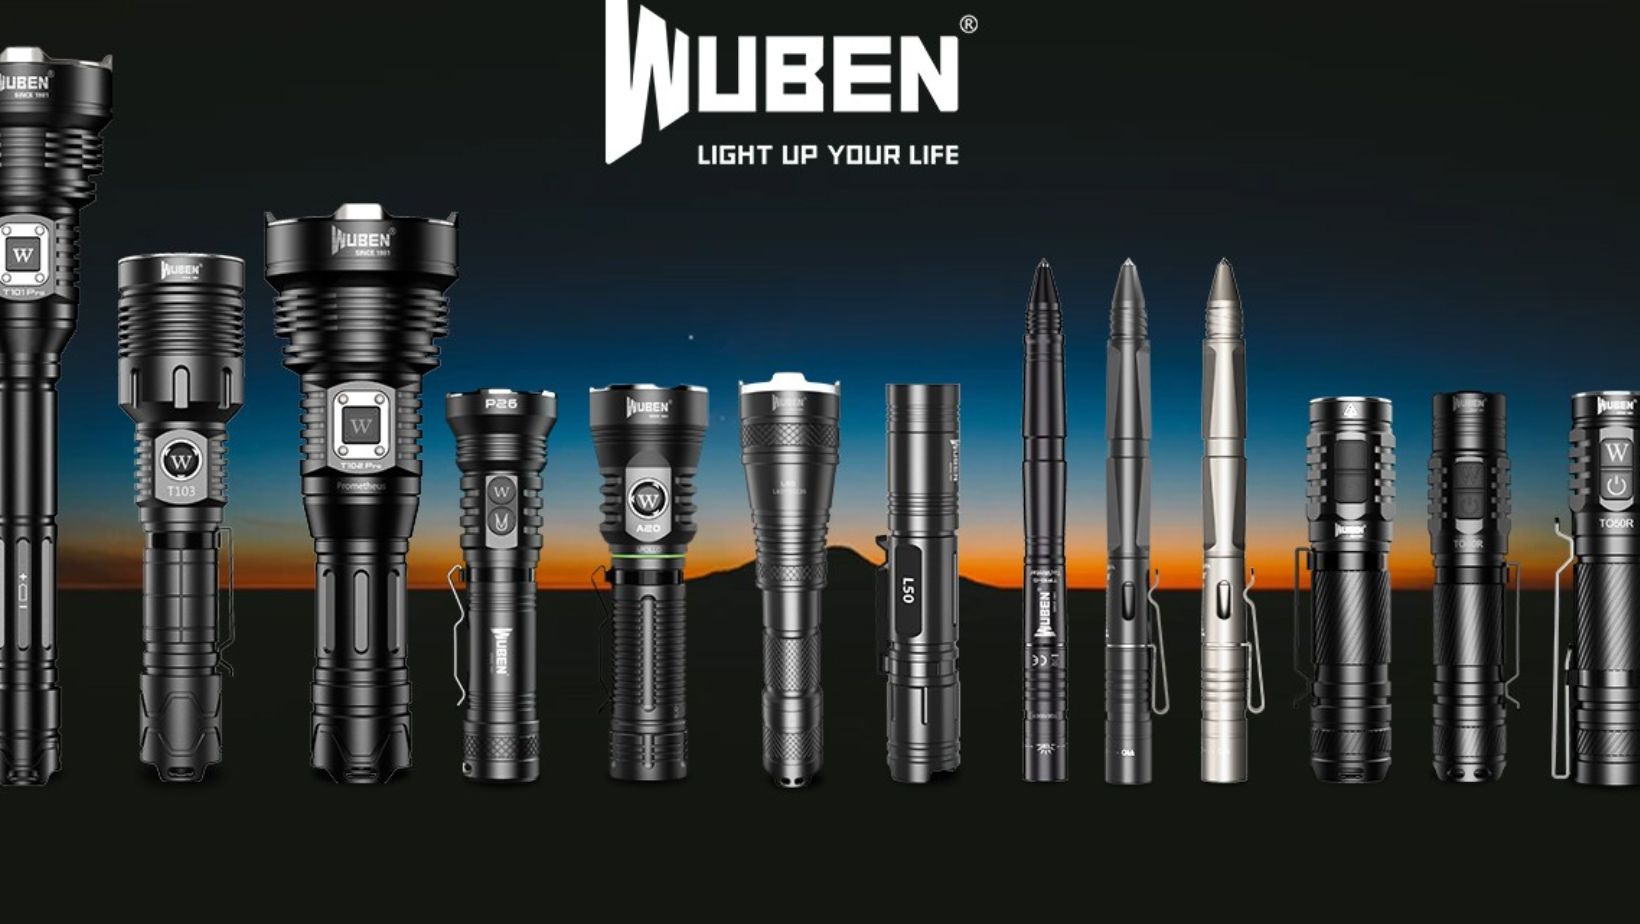 What Products Does the Wuben Store Offer?